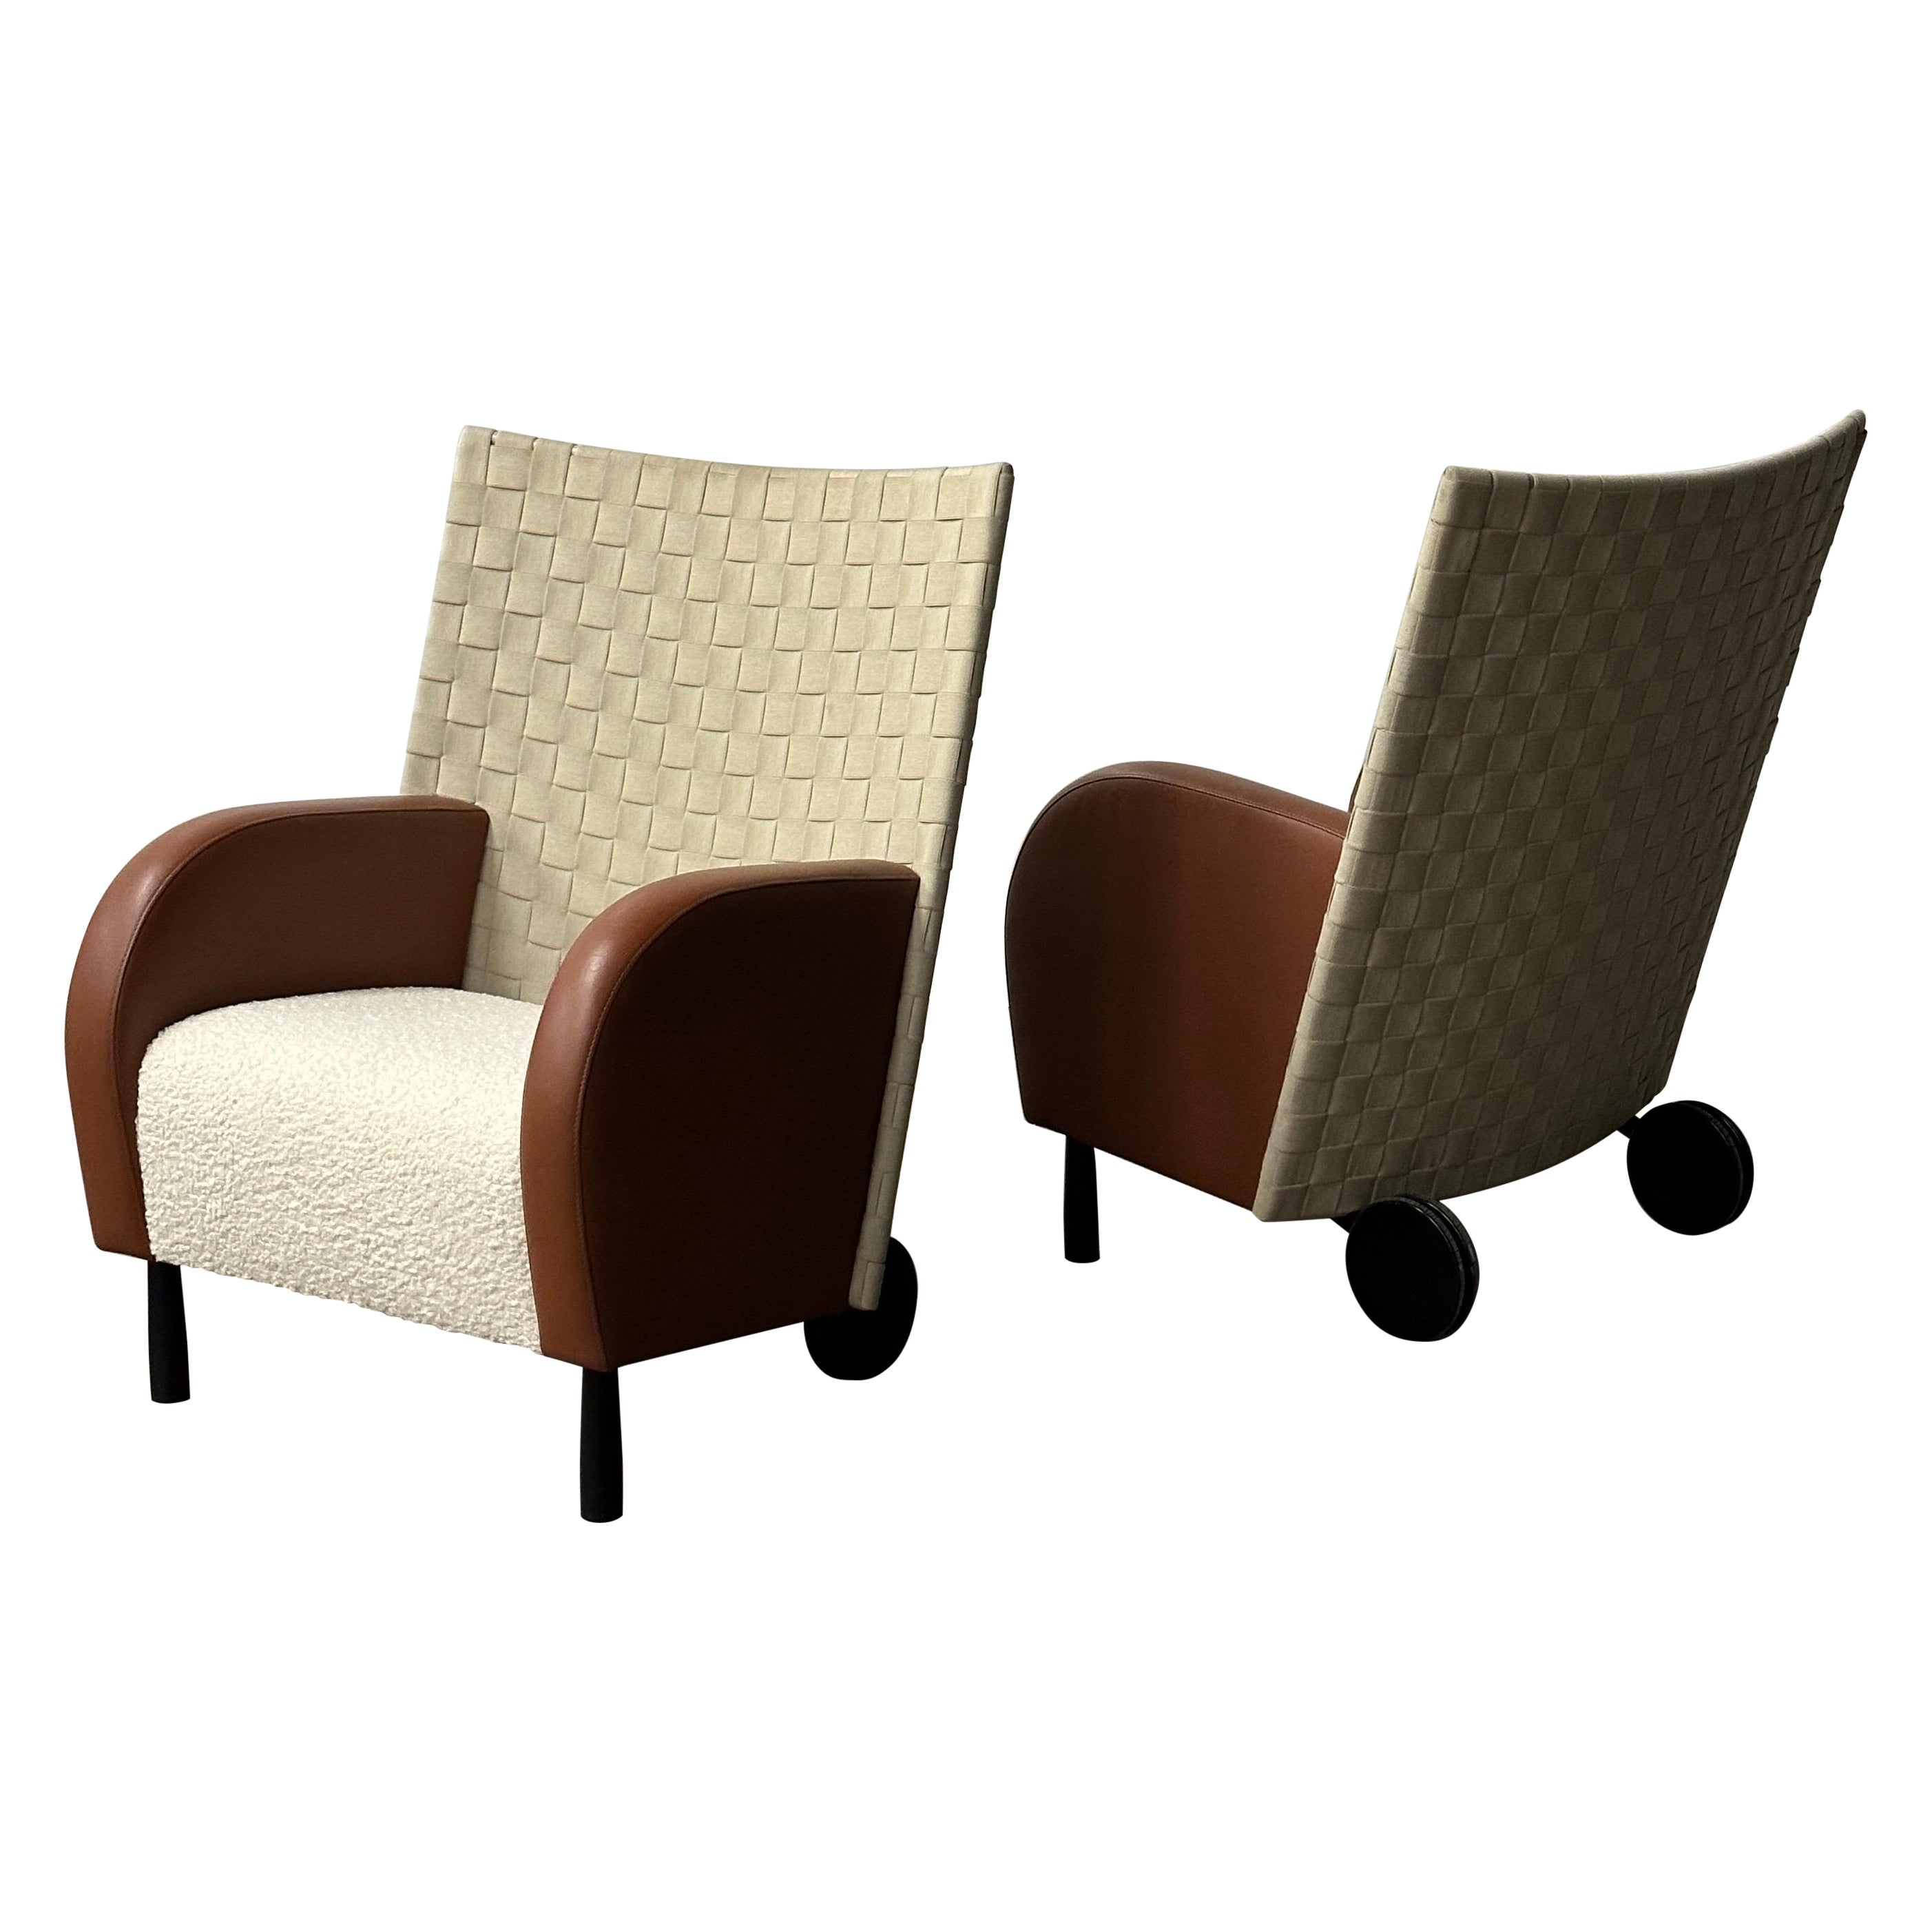 Modern Art Deco Lounge Chairs For Sale